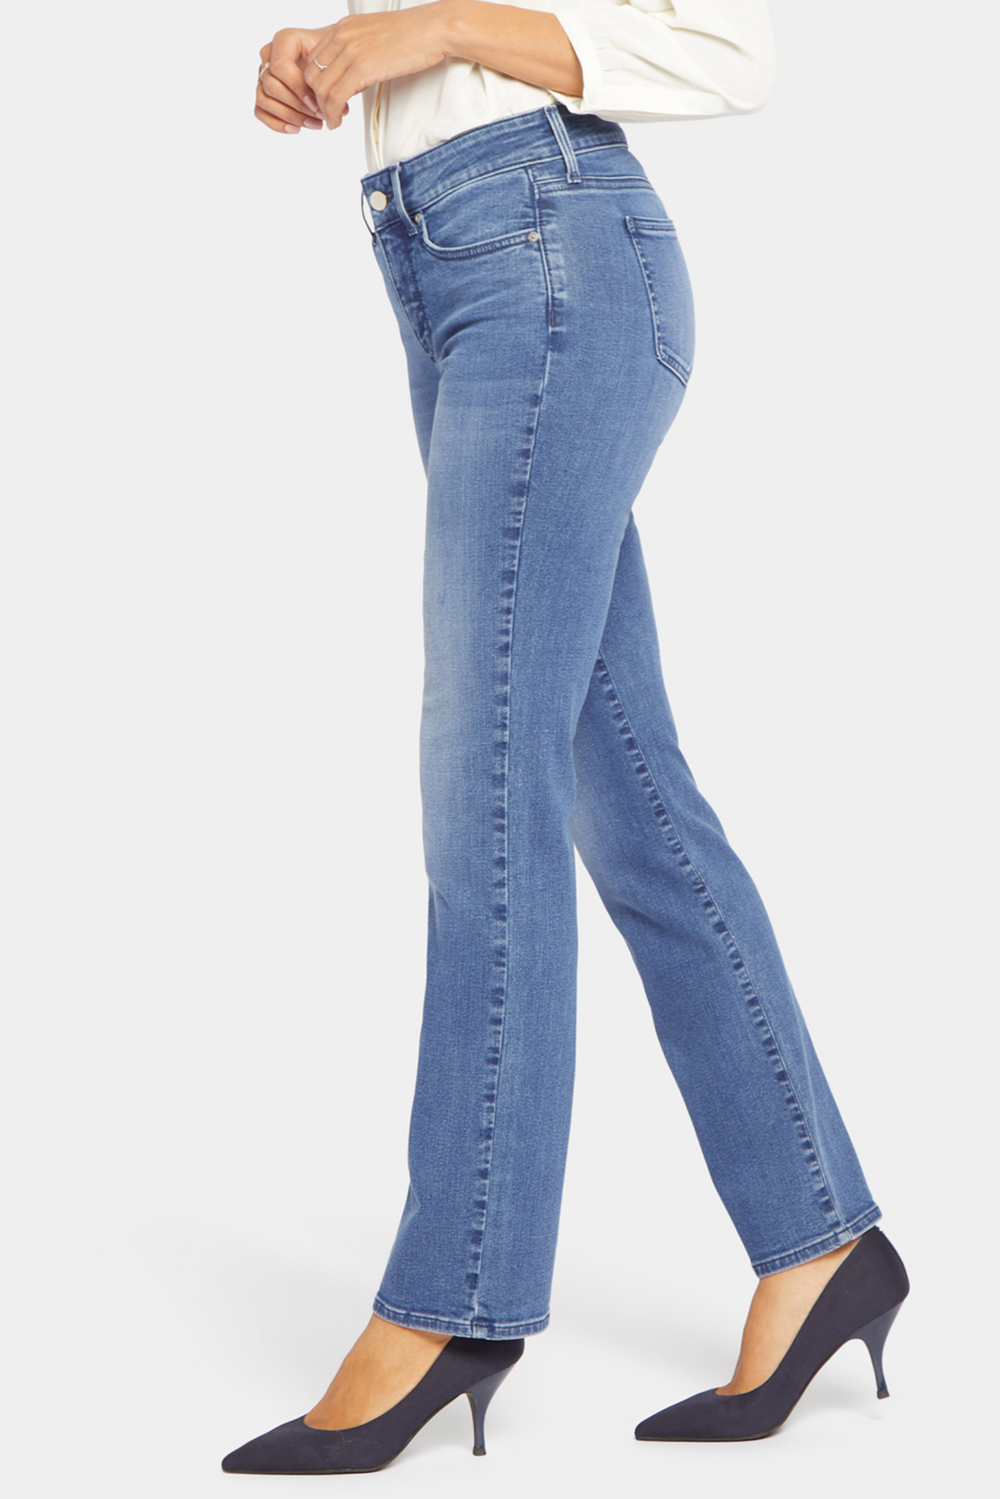 NYDJ Marilyn straight jeans (mid-rise, zip) 7 washes